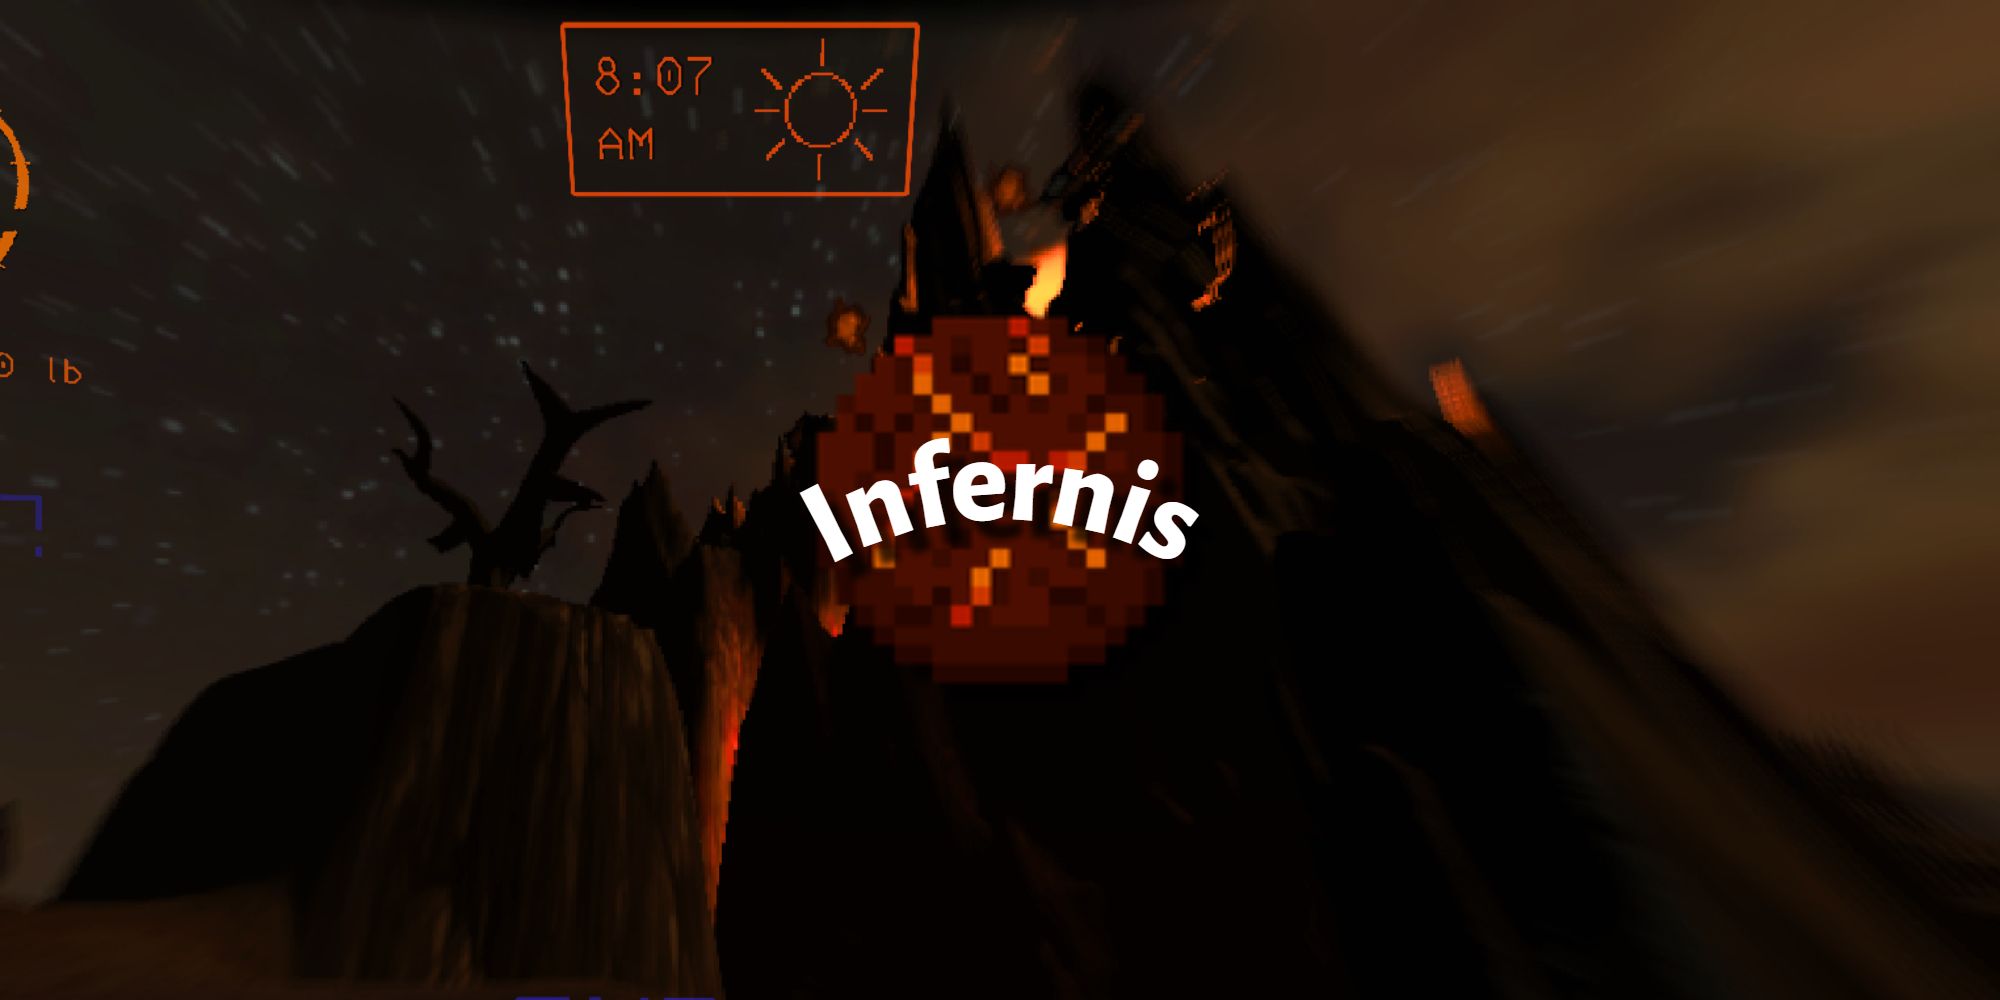 A photo of the volcanic modded moon called Infernis